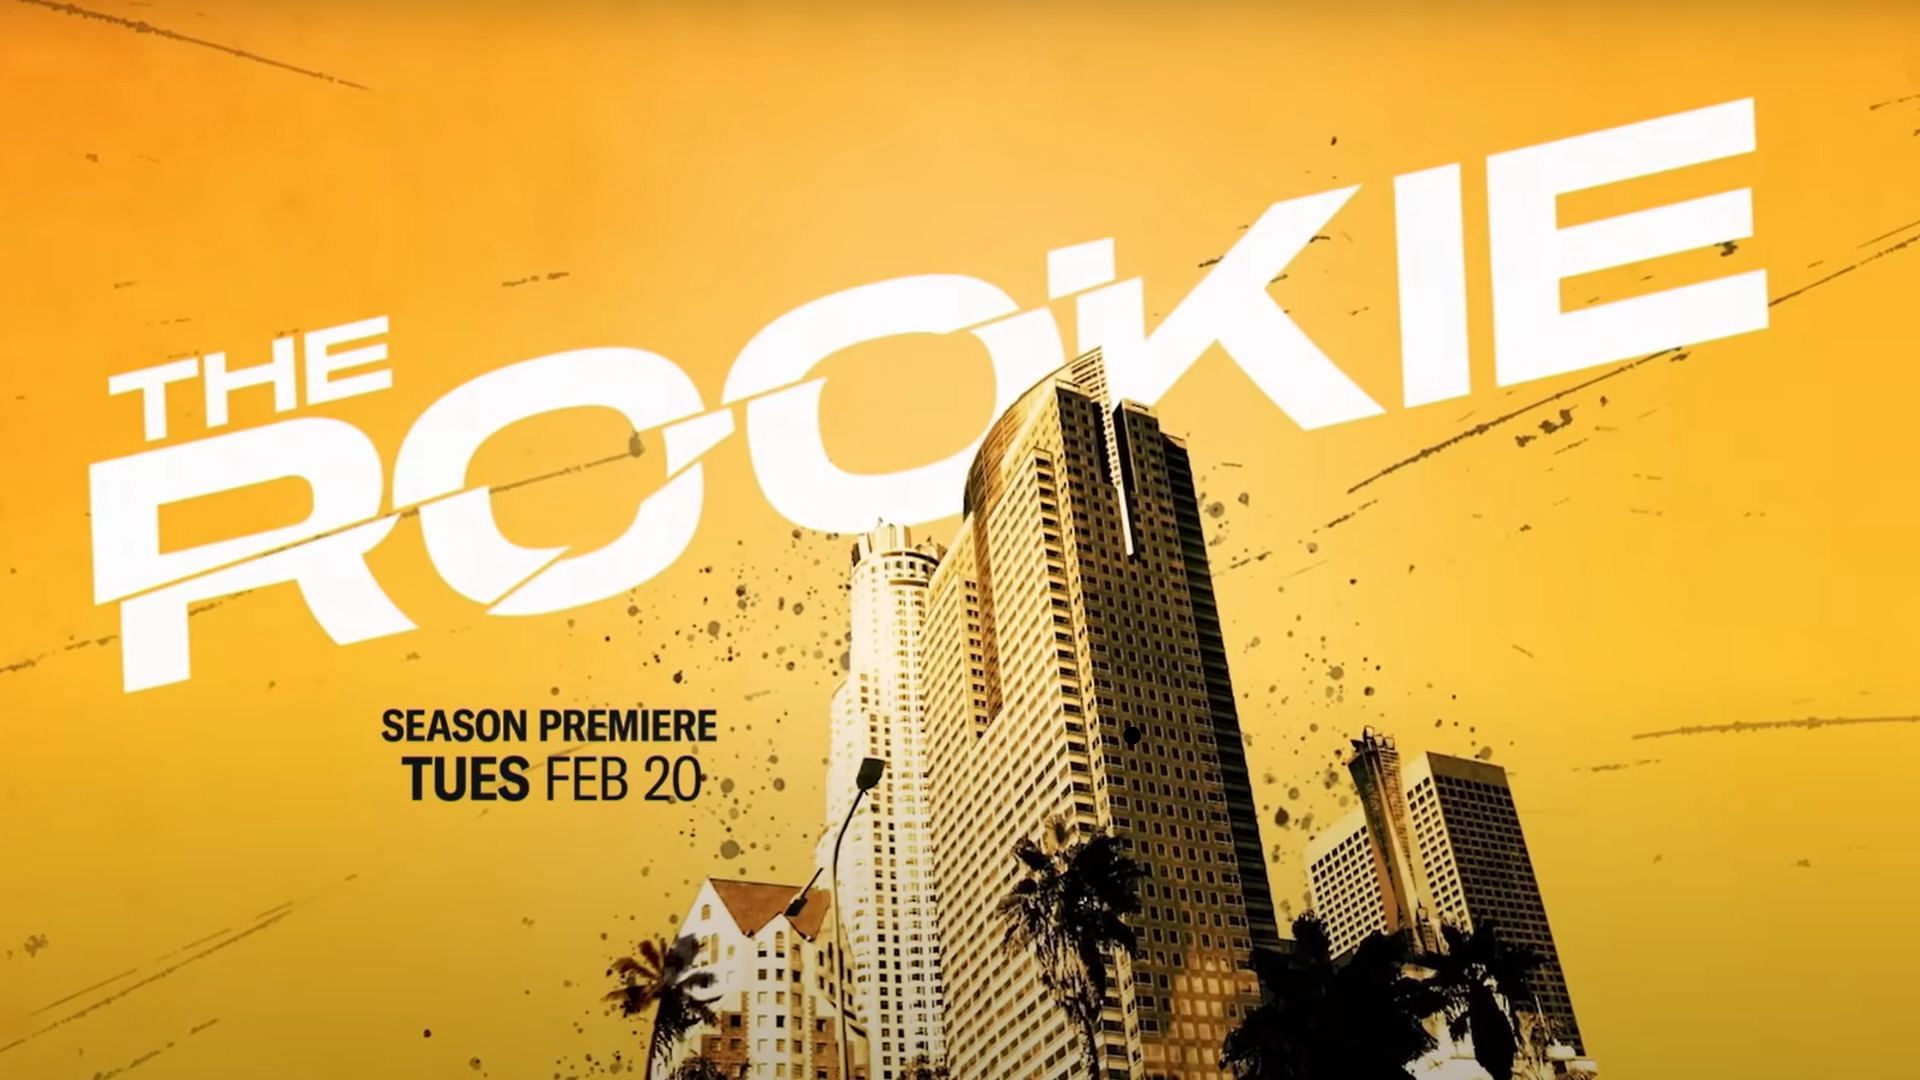 The Rookie season 6 episode 1 is available for streaming on Hulu (Image via ABC)